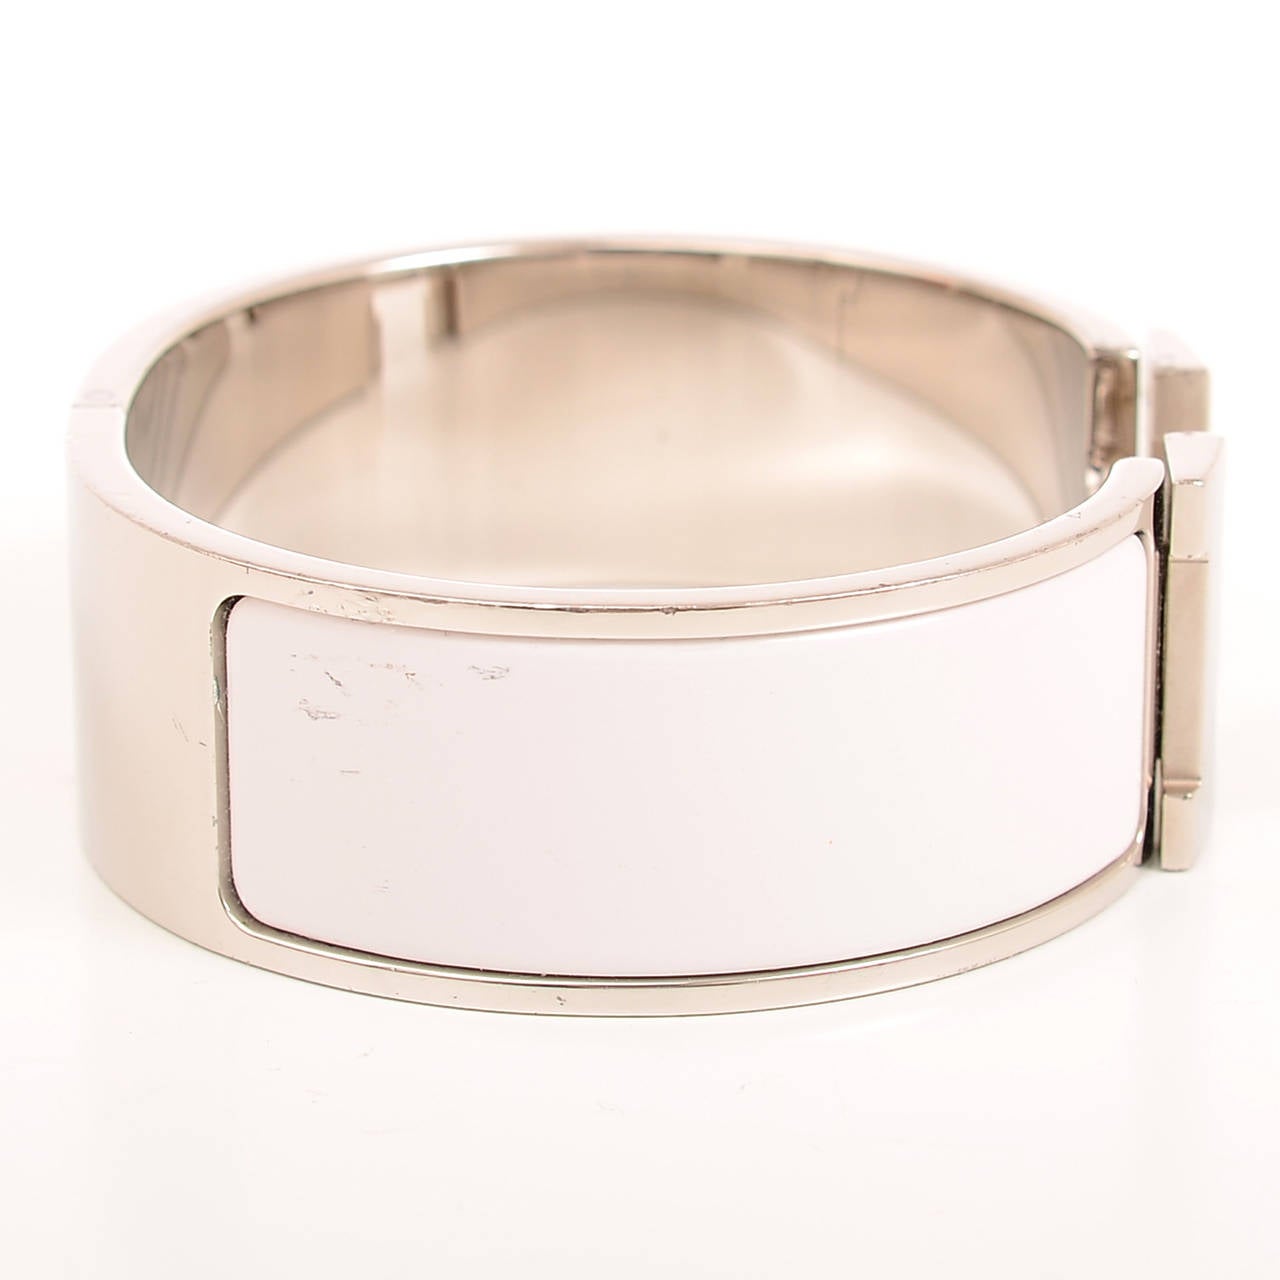 Hermes wide Clic Clac H bracelet in white enamel with palladium and silver plated hardware in size PM.

Hermes is renowned for its enamel and leather bracelets. Hermes printed enamel bangles, enamel Clic Clac H bracelets, and leather/exotic